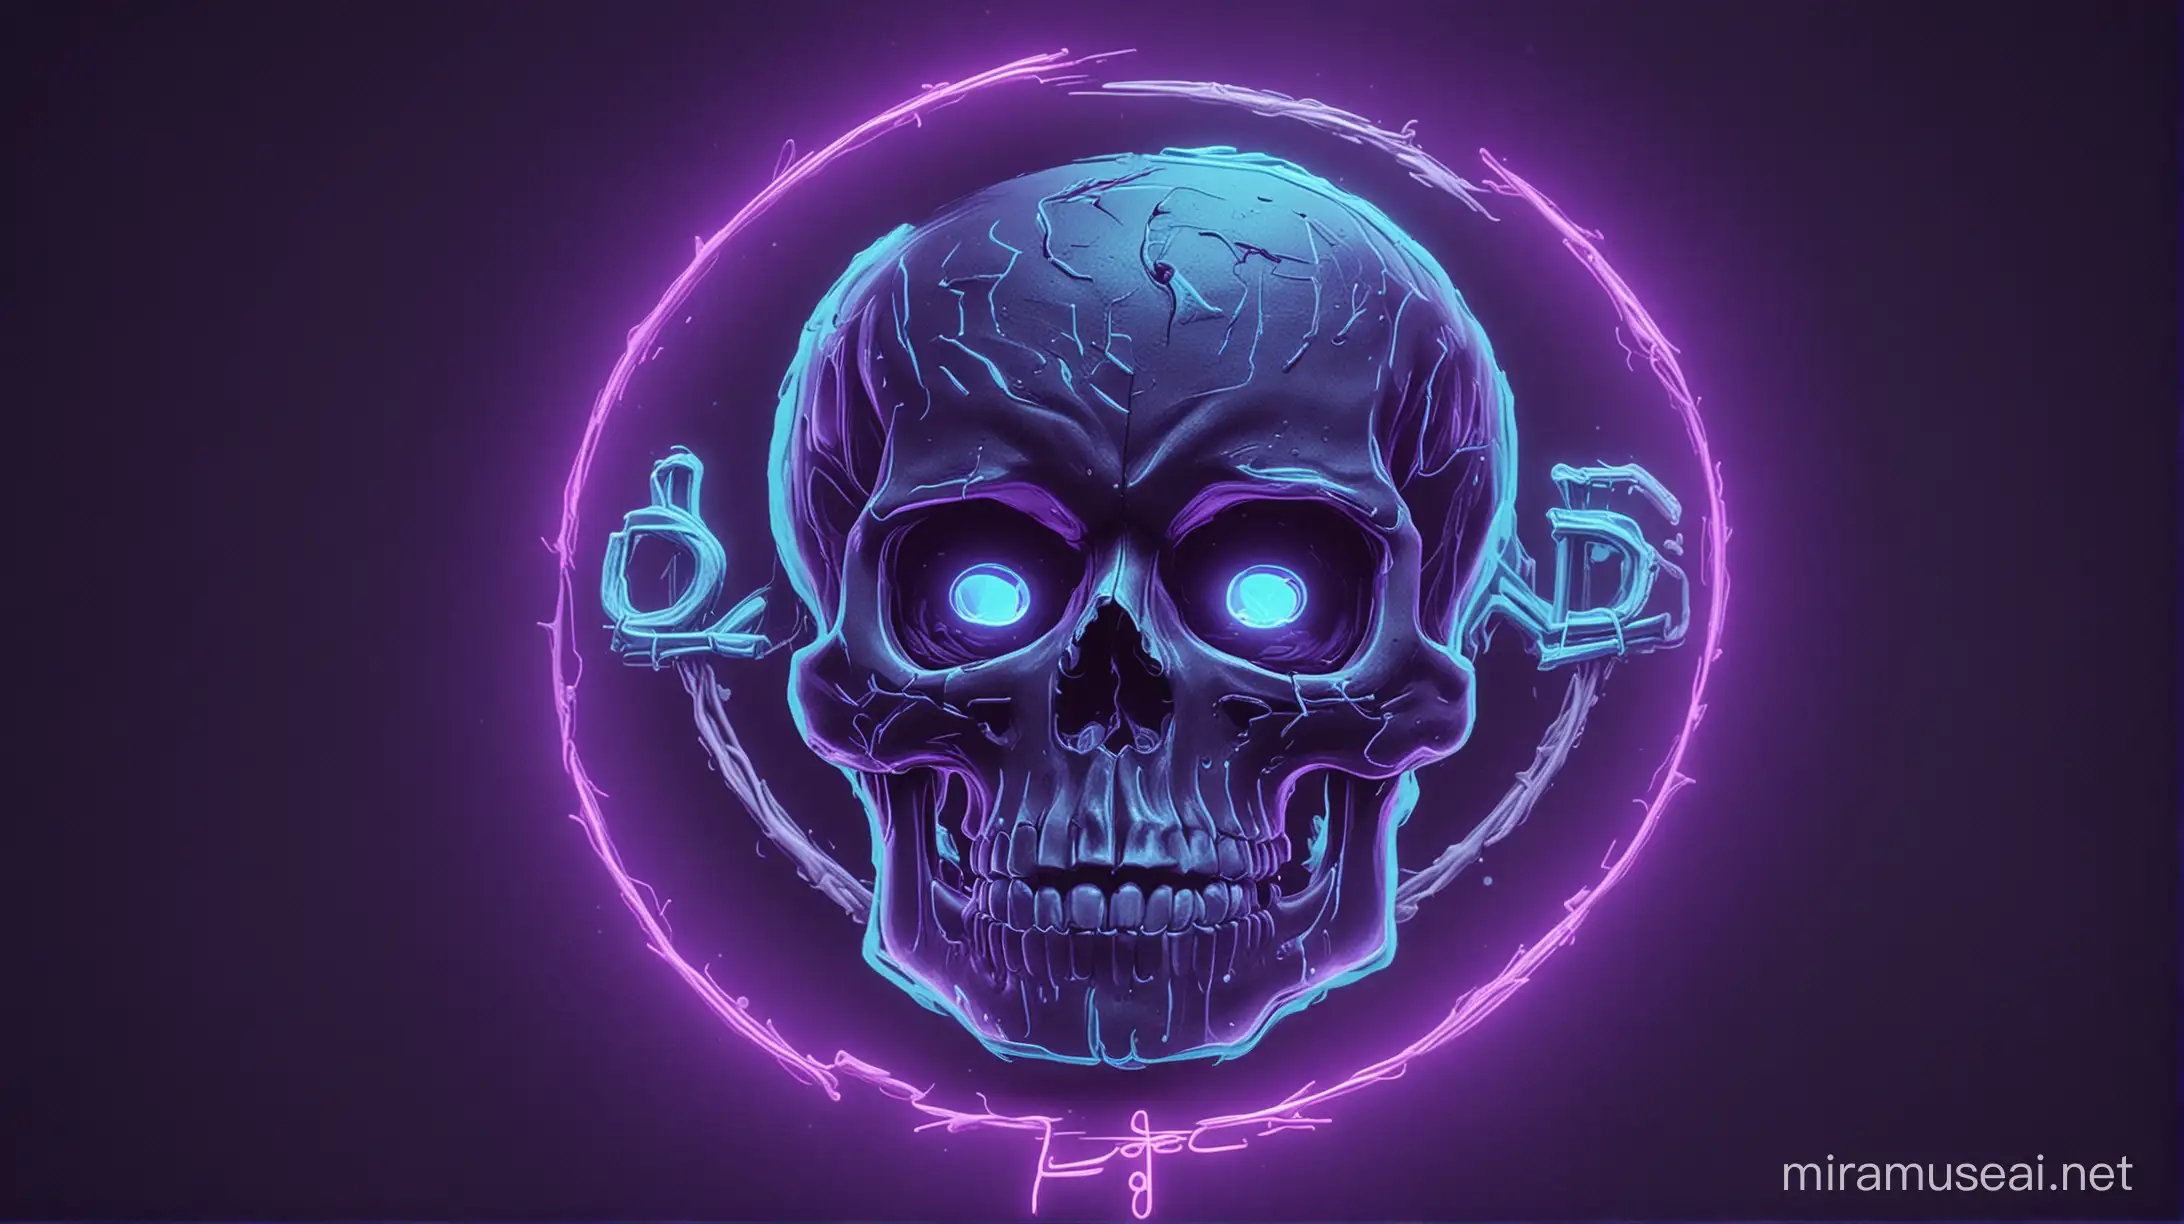 Neon Purple and Blue Skull Logo for DEAD Online Course